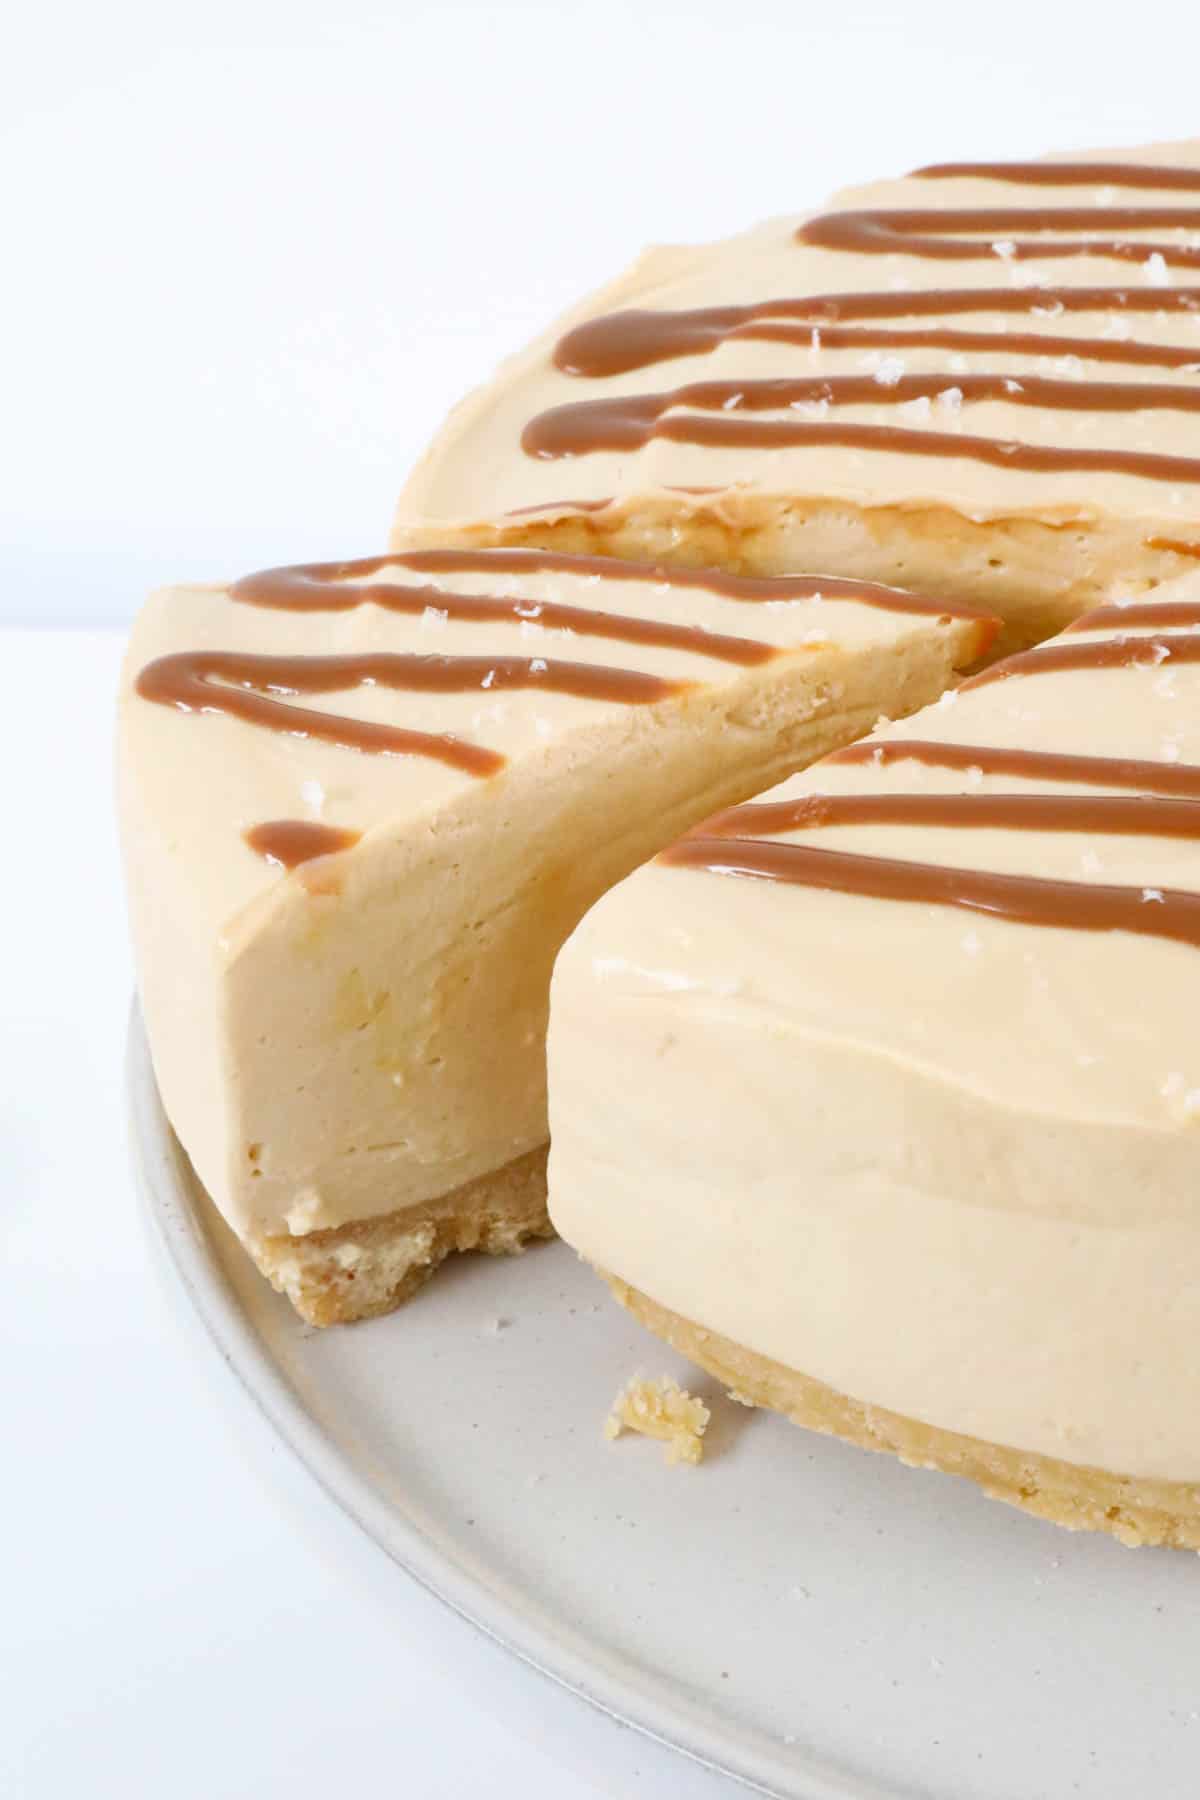 Sliced salted caramel cheesecake drizzled with caramel sauce on a plate.